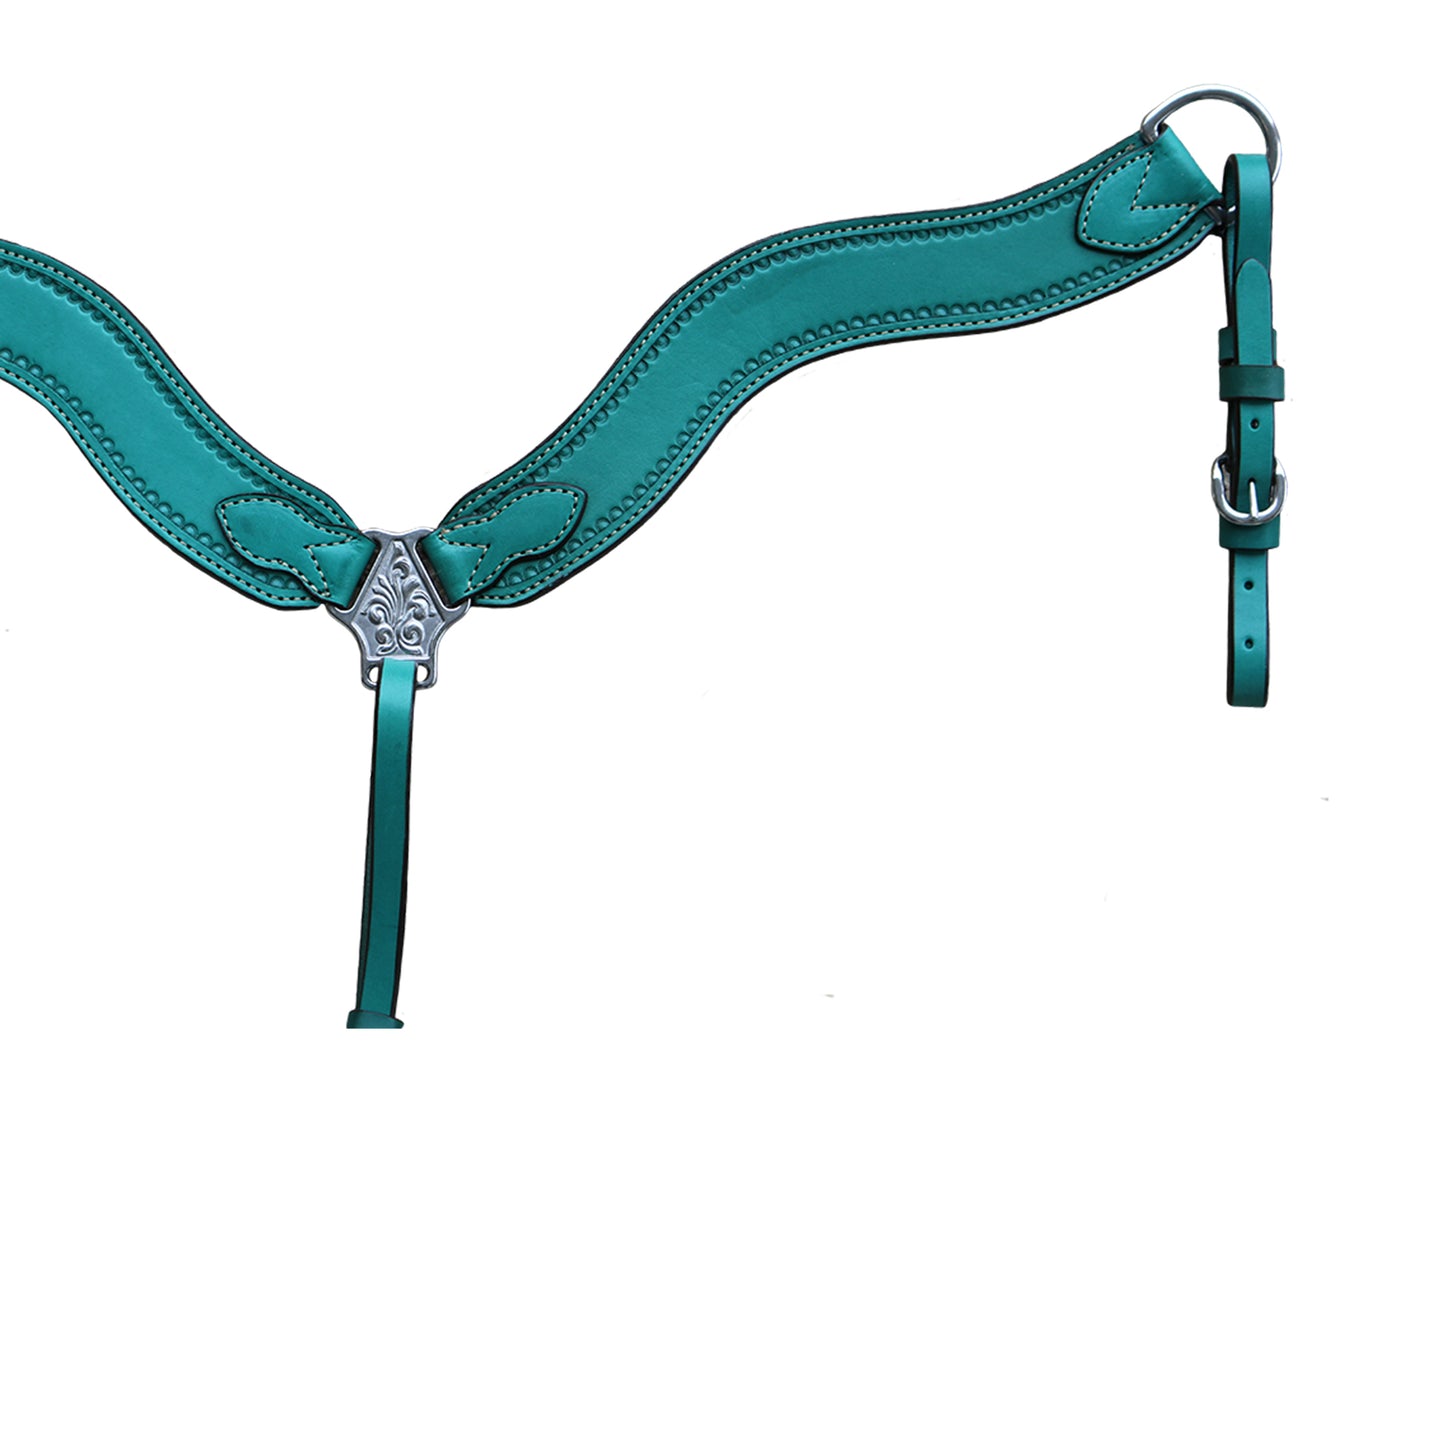 2-1/2" Wave breast collar turquoise leather border shell tooling (color may vary).